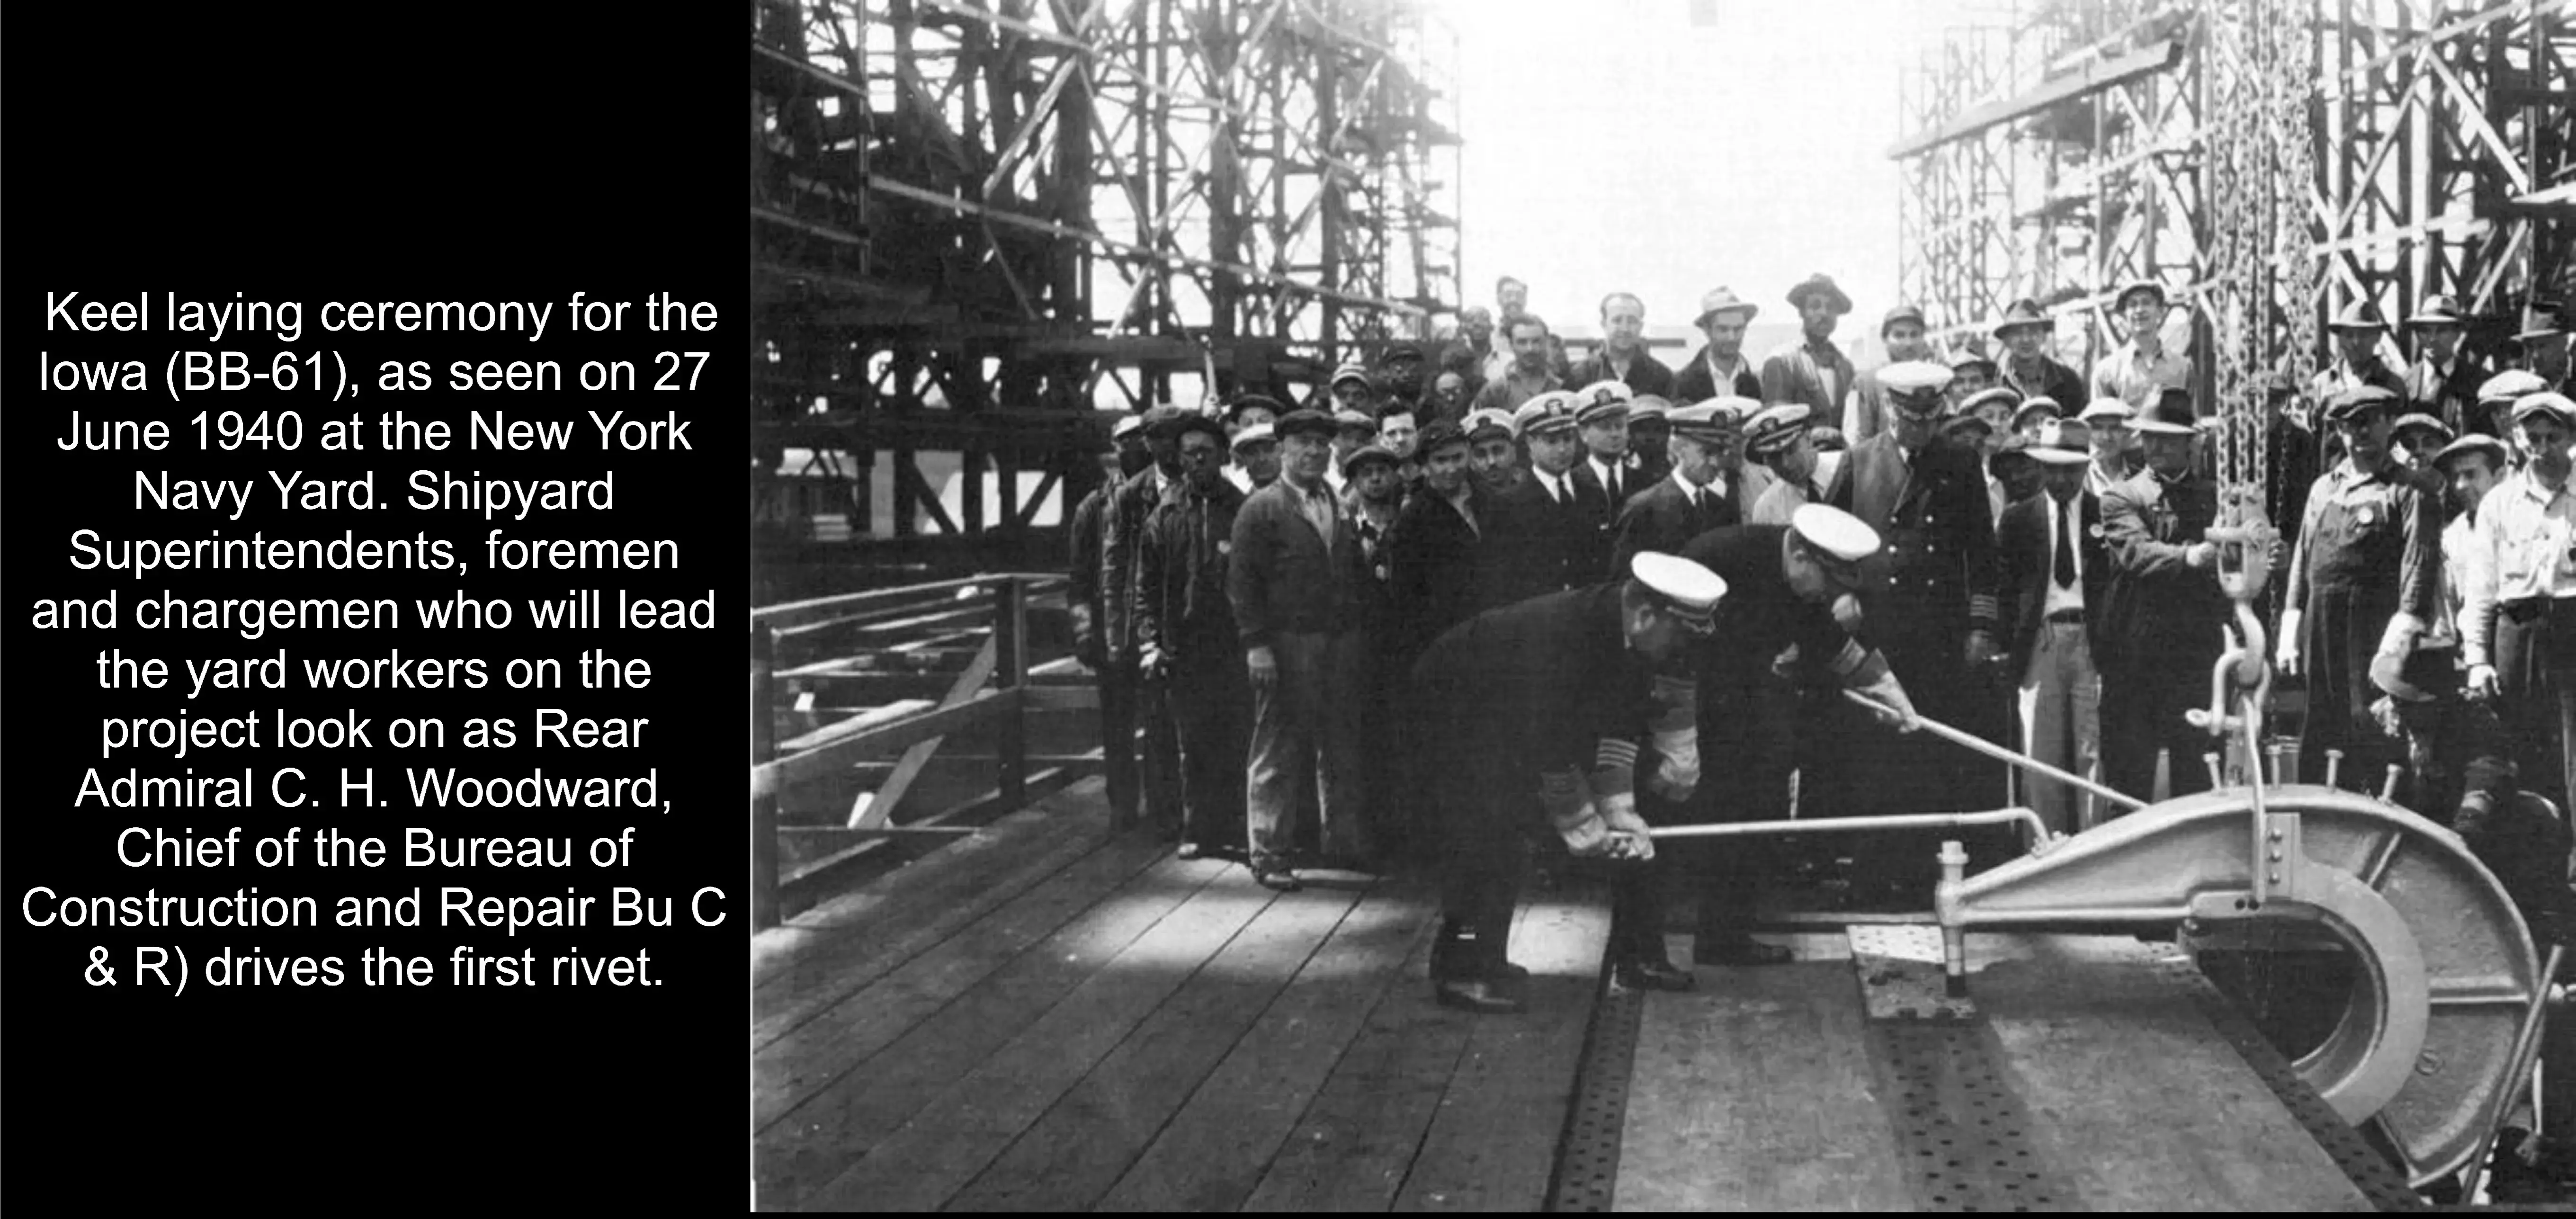 Keel laying ceremony for the lowa (BB-61), as seen on 27 June 1940 at the New York Navy Yard. Shipyard Superintendents, foremen and chargemen who will lead the yard workers on the project look on as Rear Admiral C. H. Woodward, Chief of the Bureau of Construction and Repair (Bu C & R) drives the first rivet.